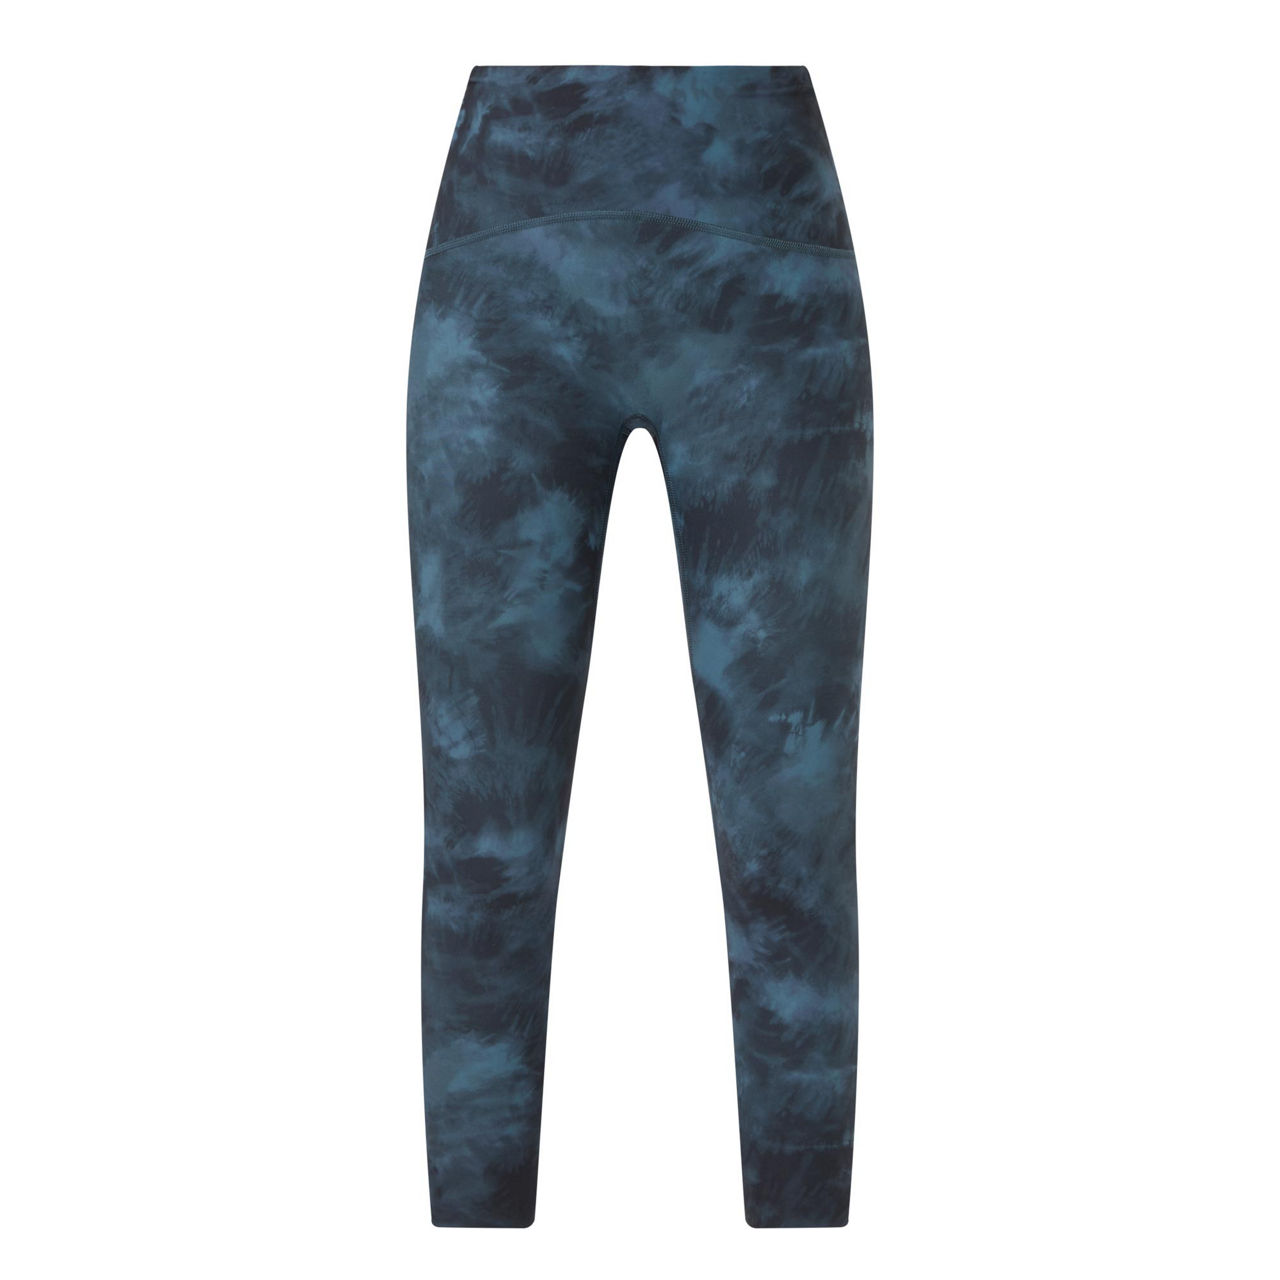 Has anyone tried the scuba 7/8 joggers? How has the cuff fit? Is